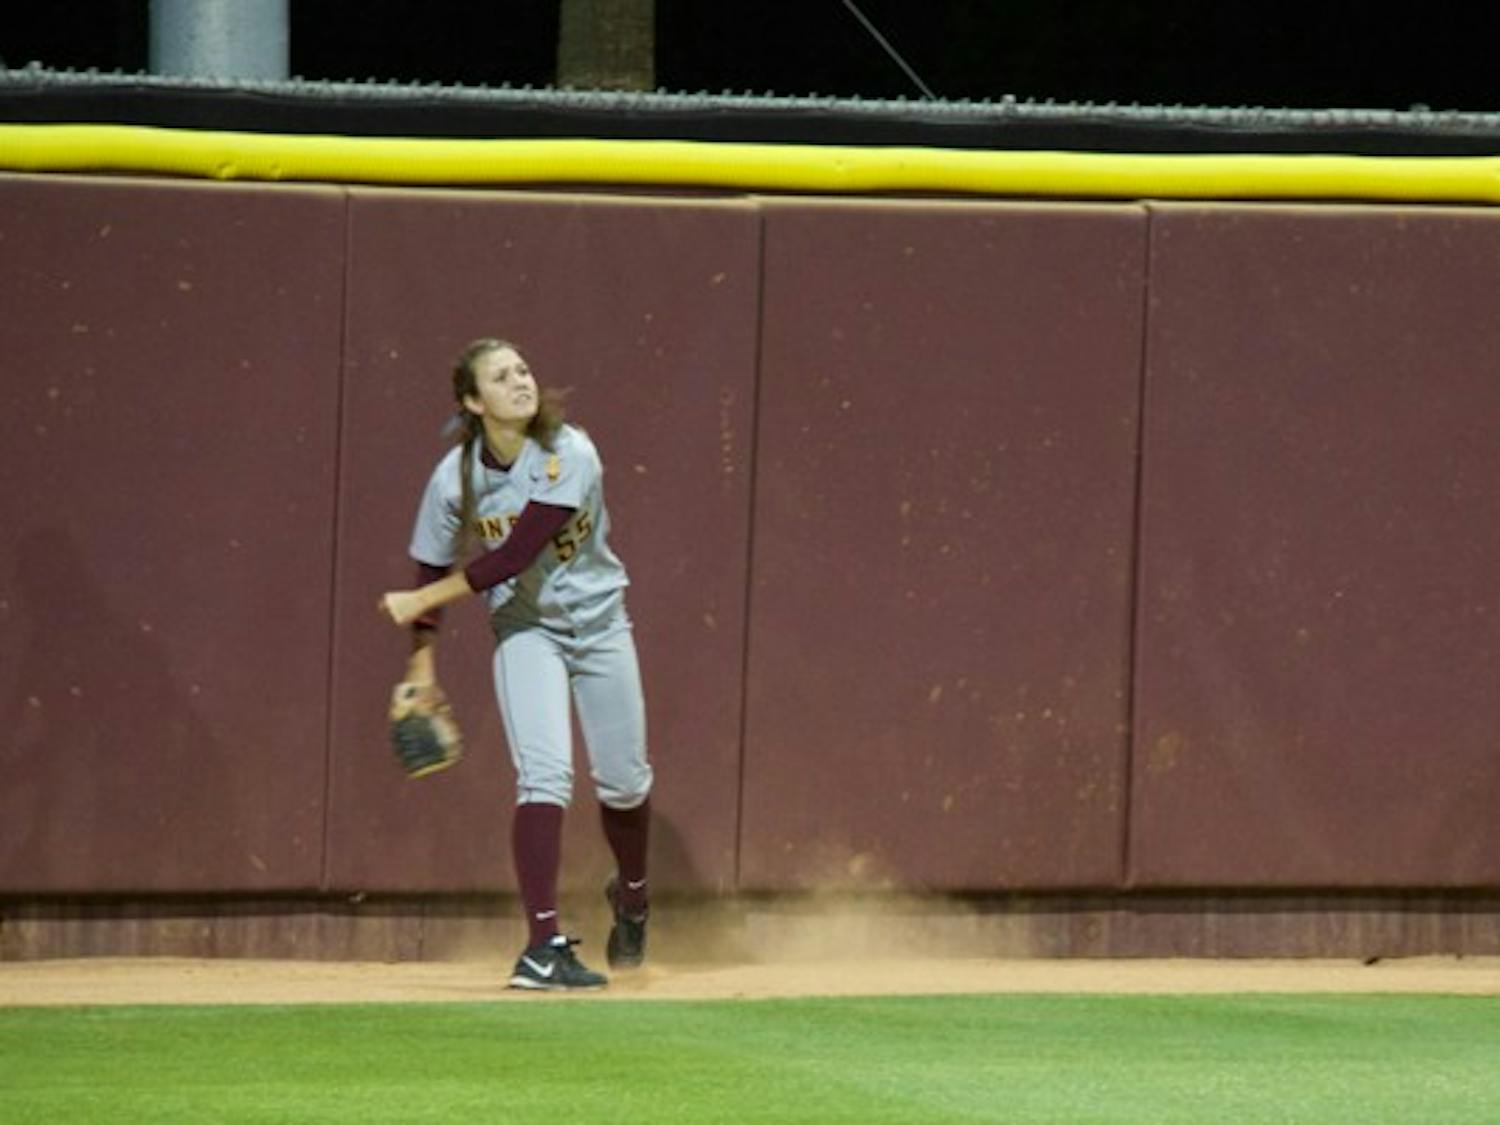 Junior outfielder Elizabeth Caporuscio throws back a fly ball during the game against the Arizona Wildcats on Sunday, March 30 at Farrington Stadium. ASU lost  6-5 in a 10-inning game. (Photo by Becca Smouse)